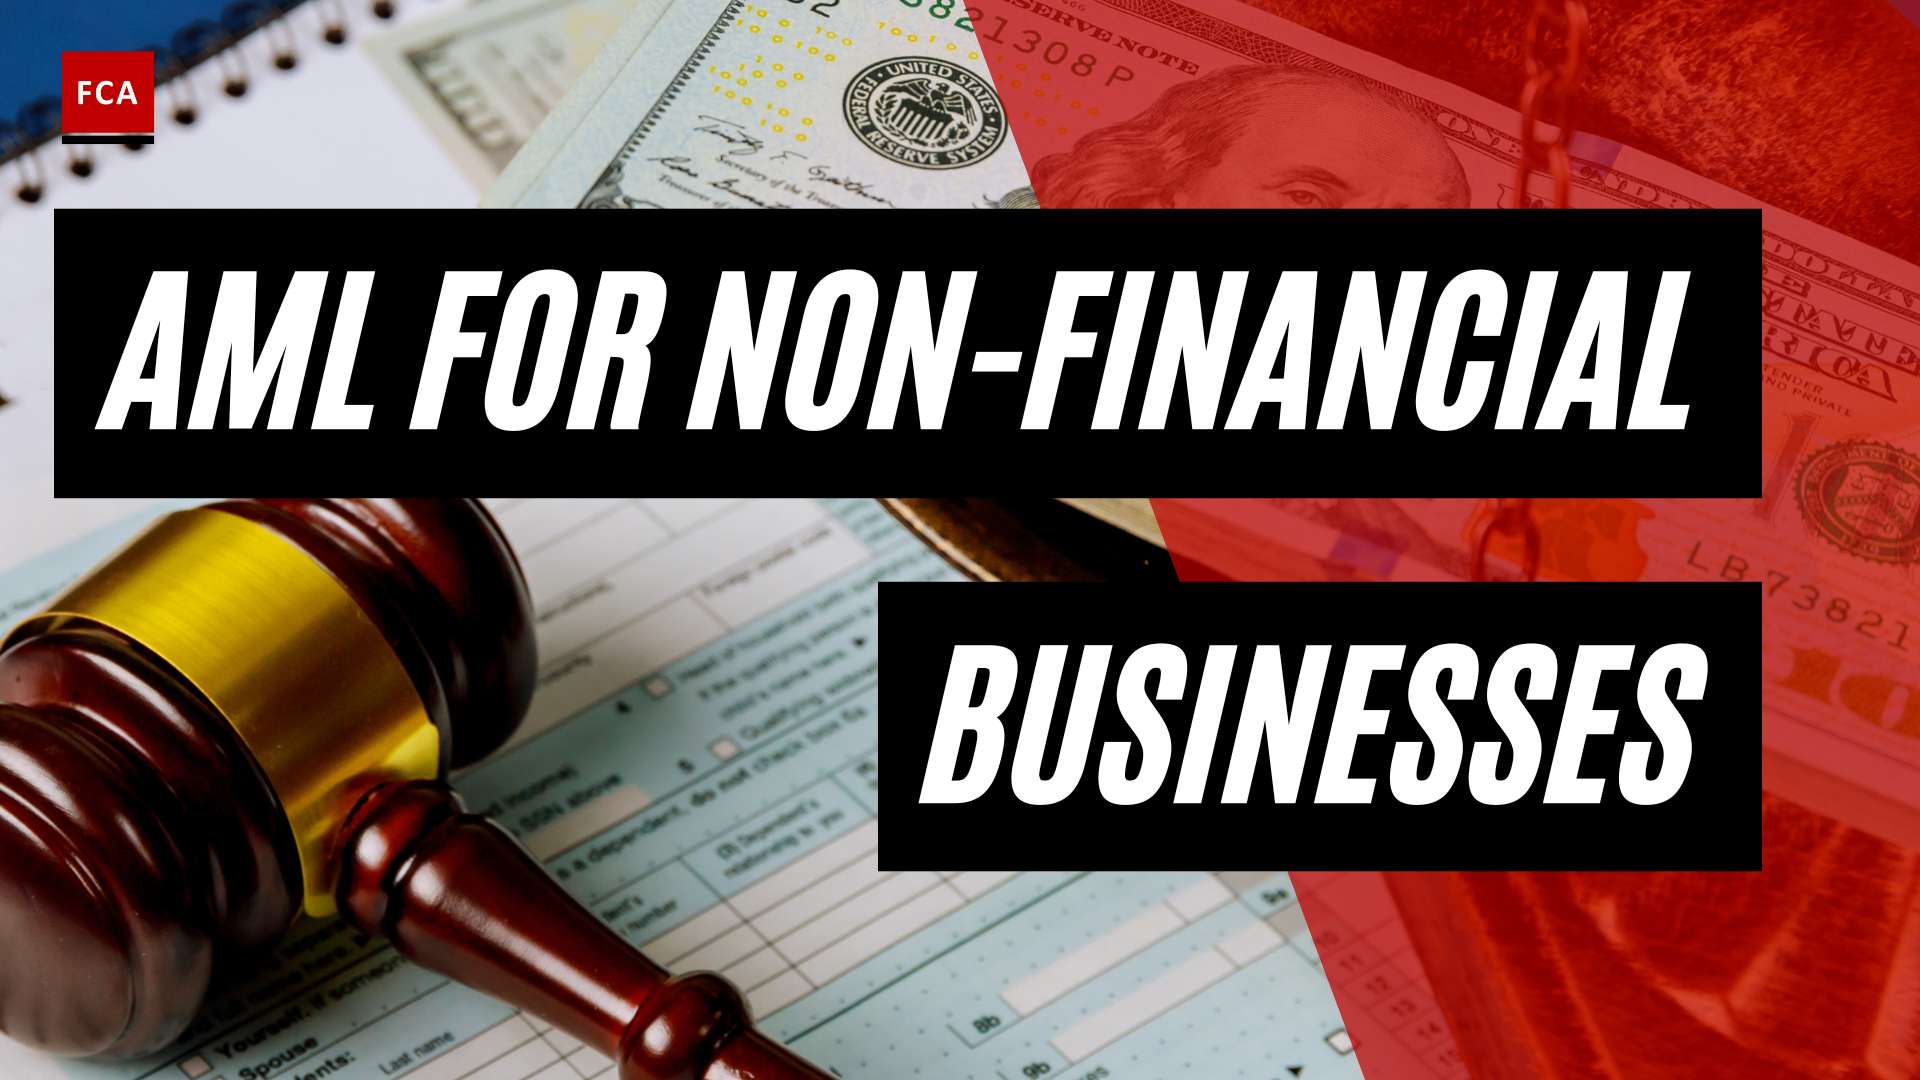 Safeguarding Your Business: Aml Policies For Non-Financial Sectors